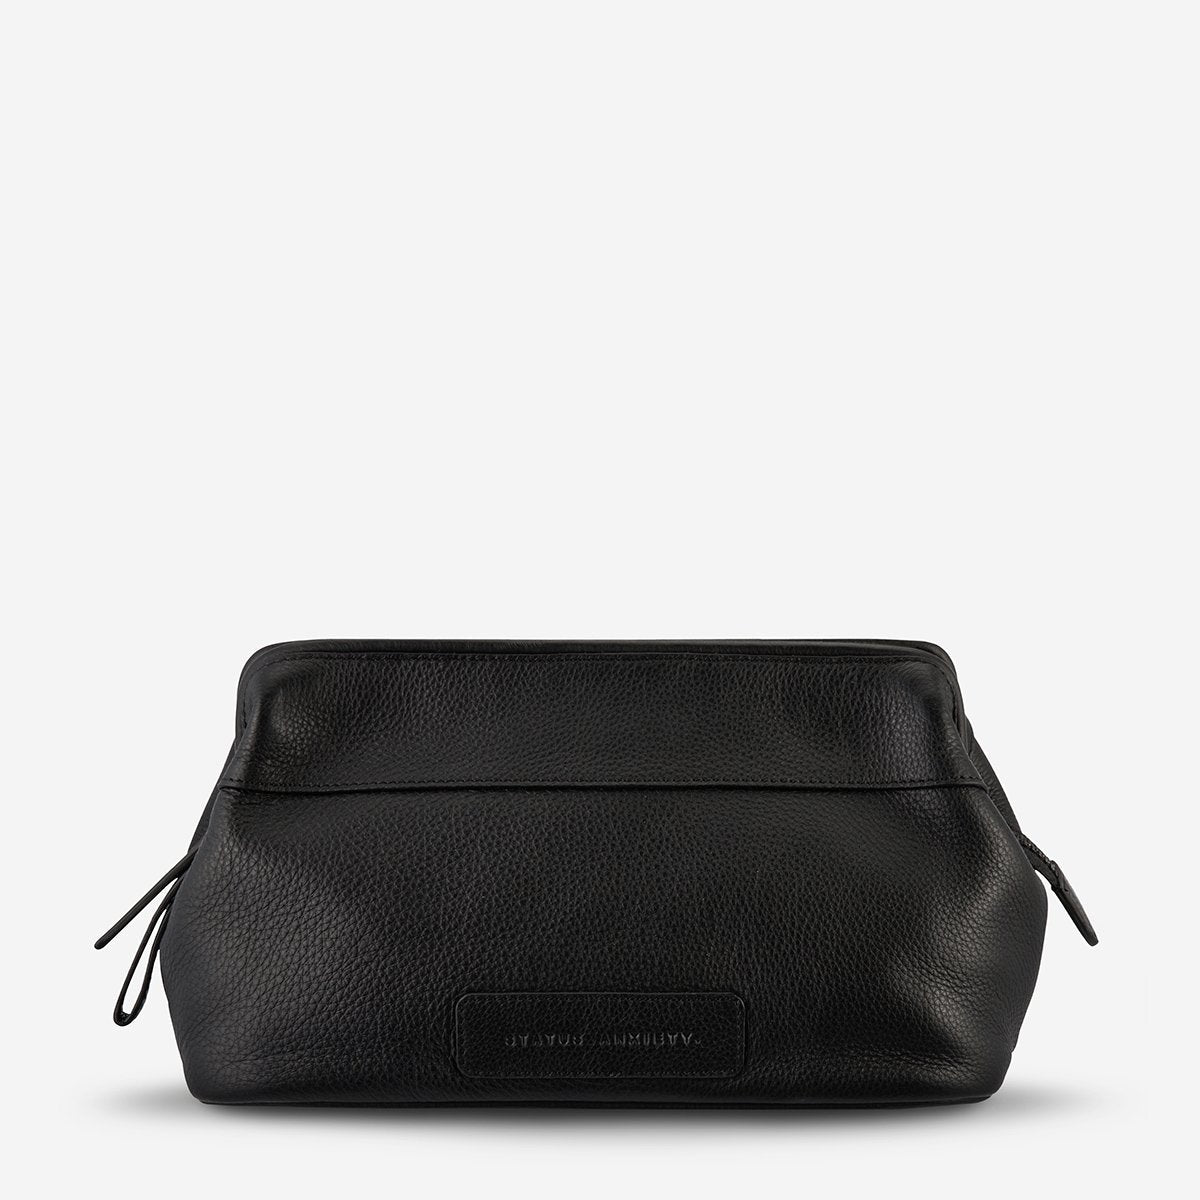 Liability Leather Toiletry Bag